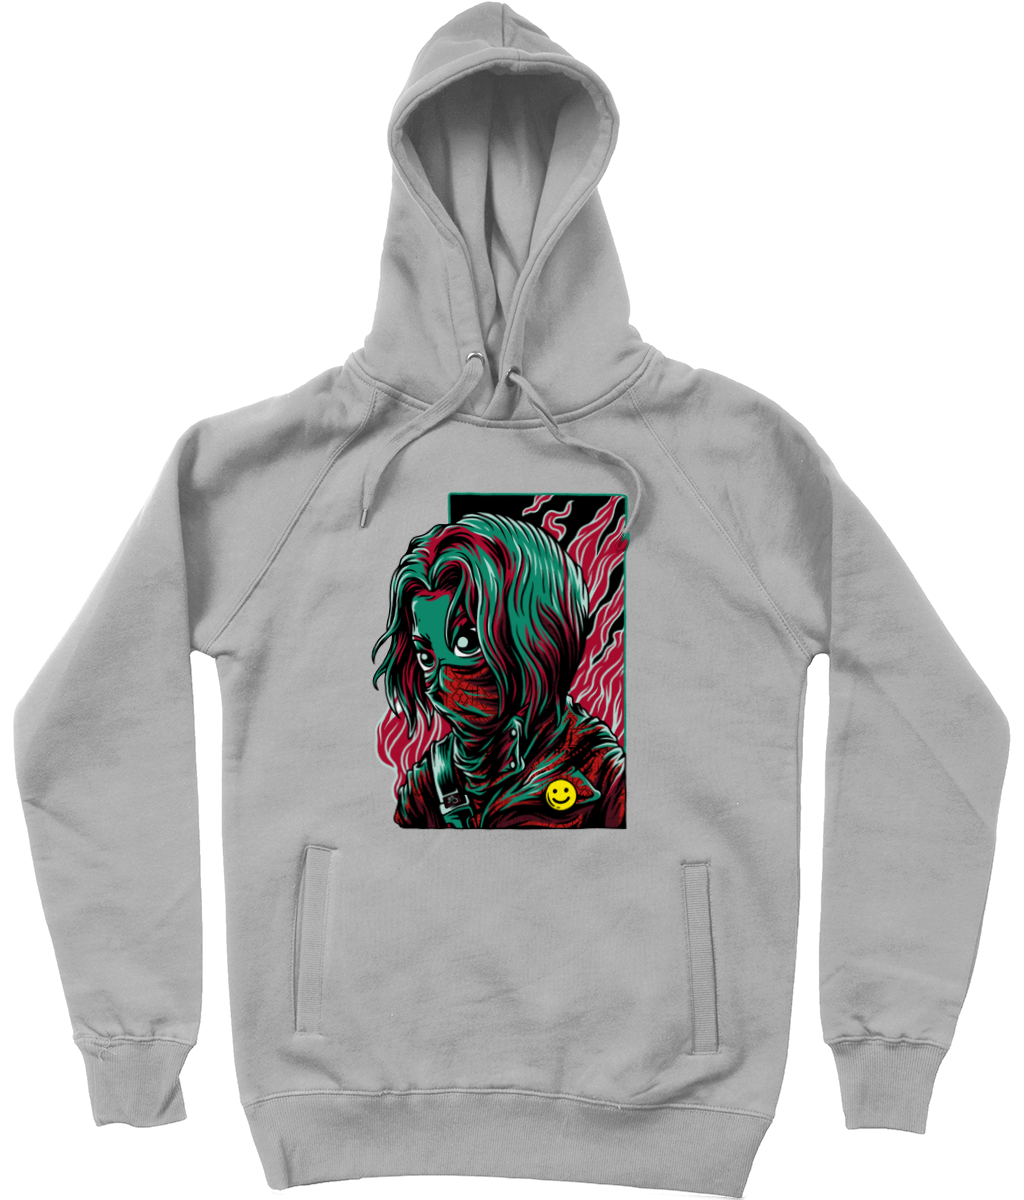 'Normalise This' Trendy Graphic Unisex Pullover Hoodie